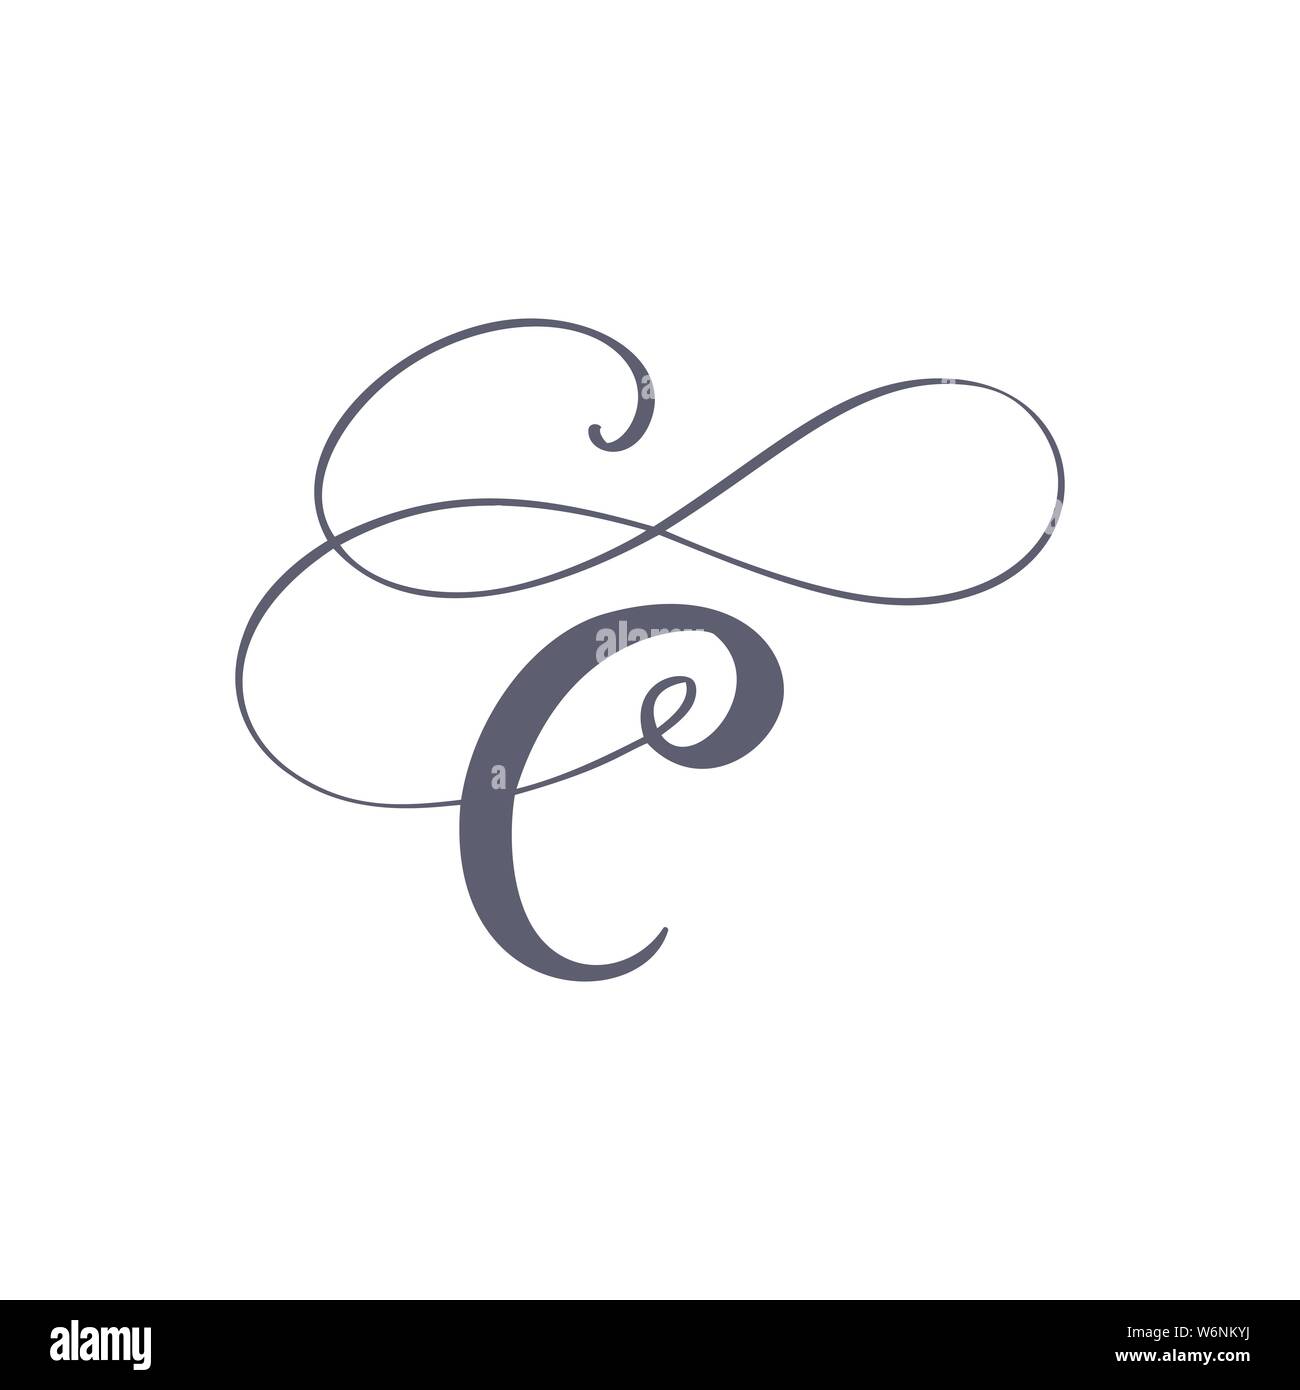 the letter c in fancy writing